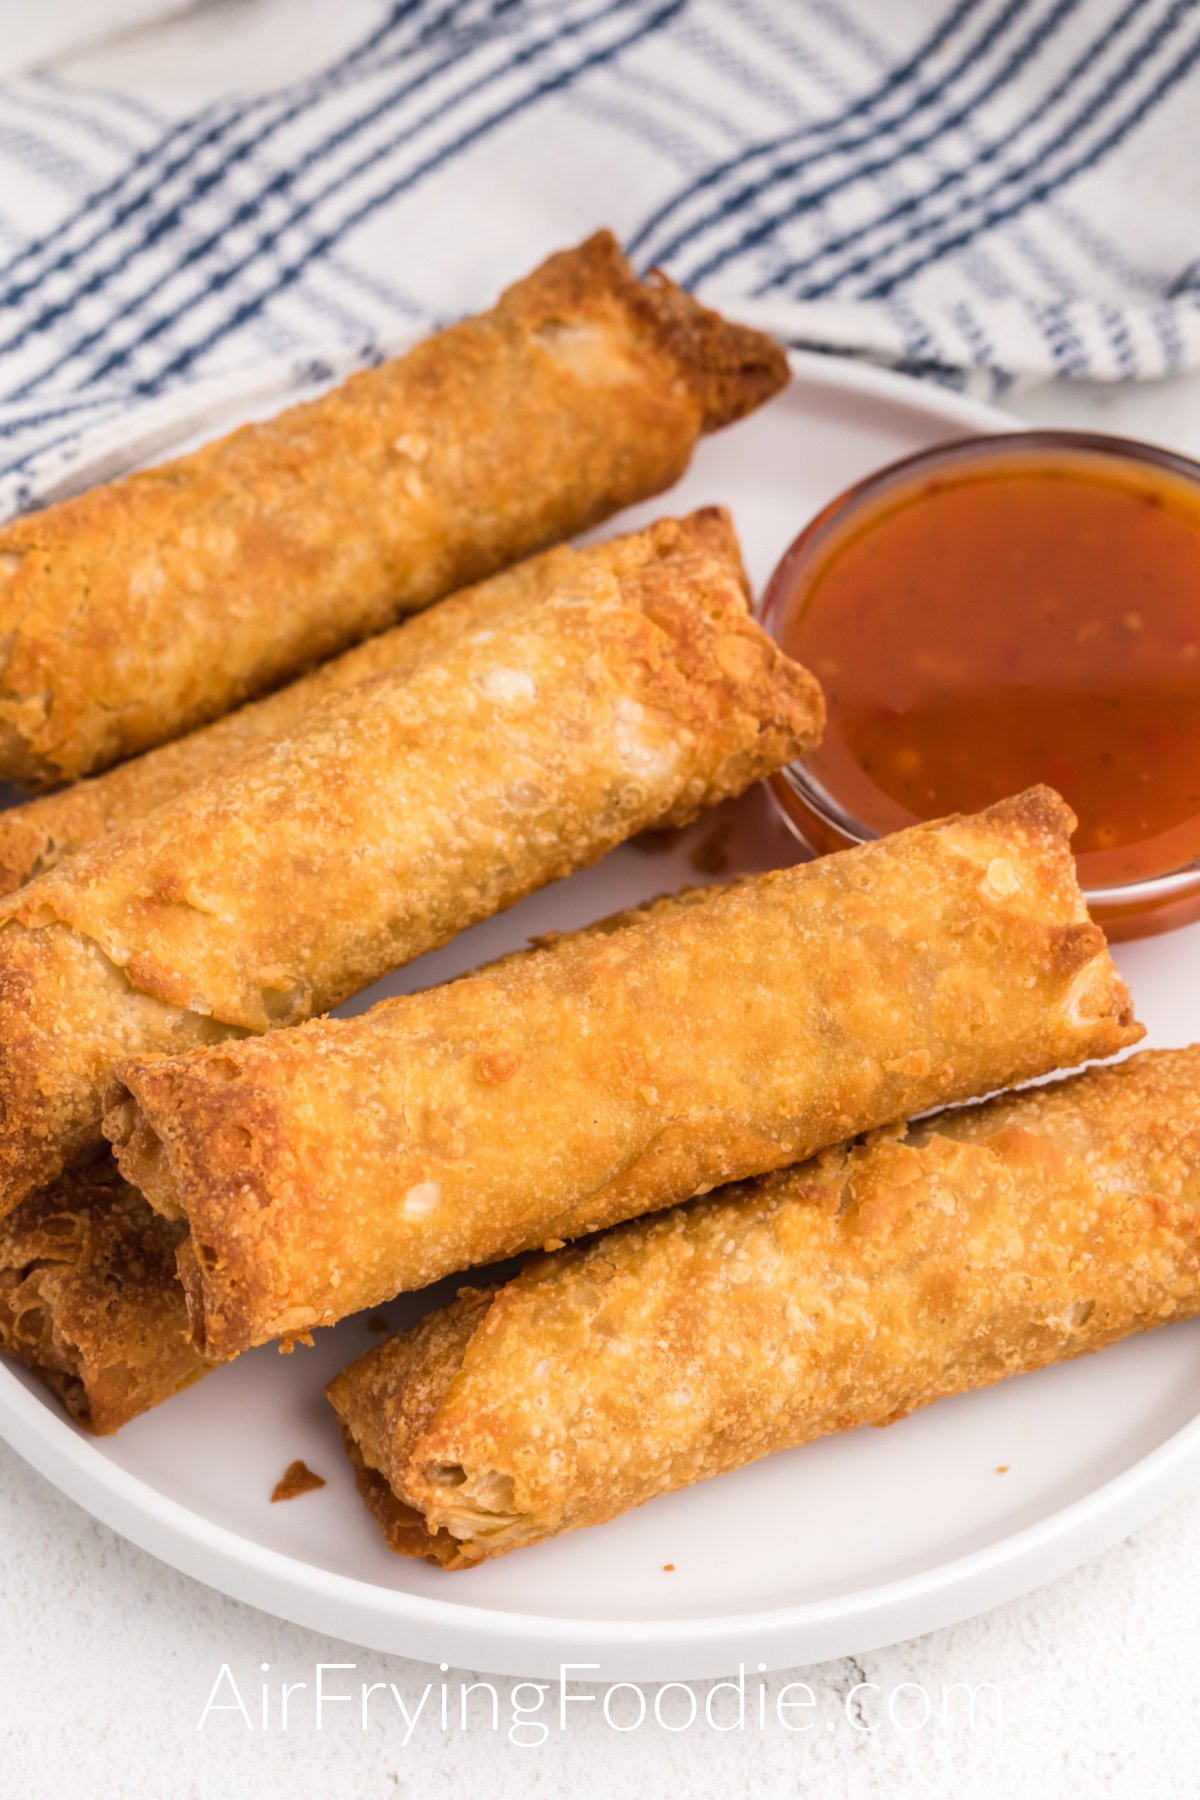 Crispy cooked golden brown frozen egg rolls made in the air fryer served on a white plate with dipping sauce.